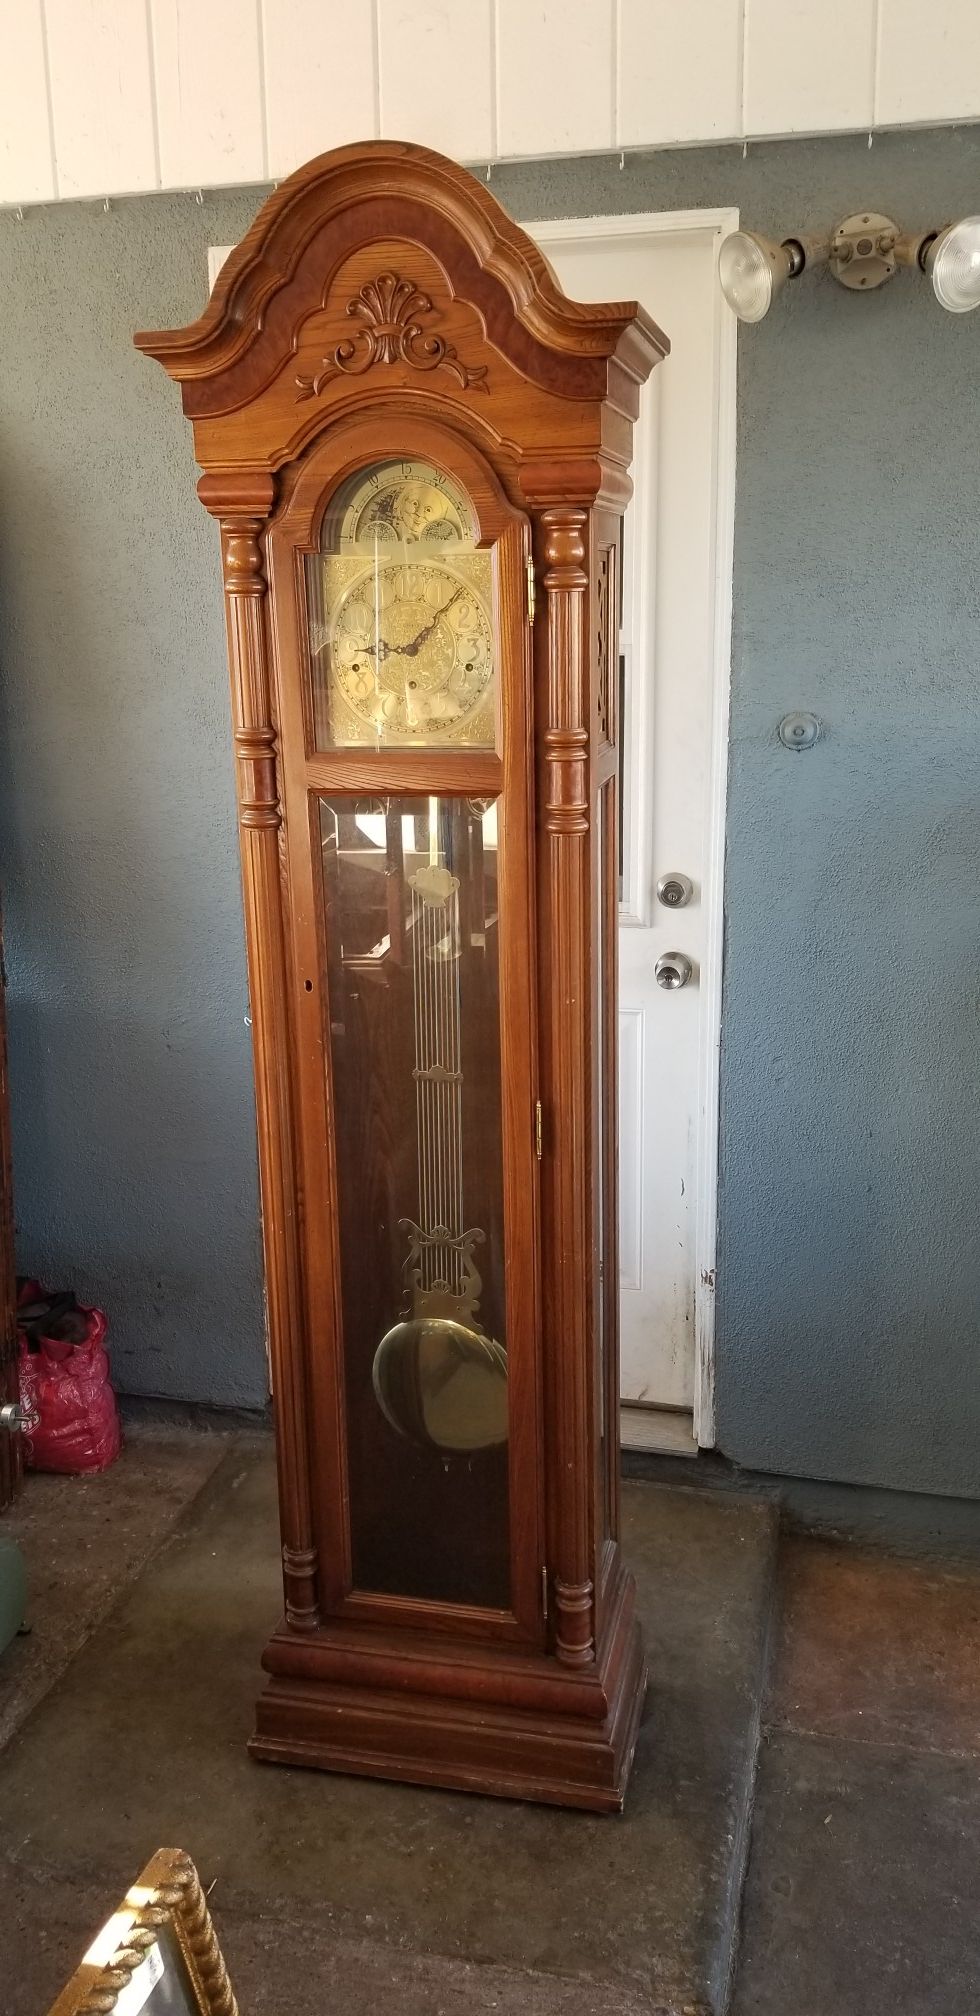 Pearl grandfather clock first 75.00 owns it!